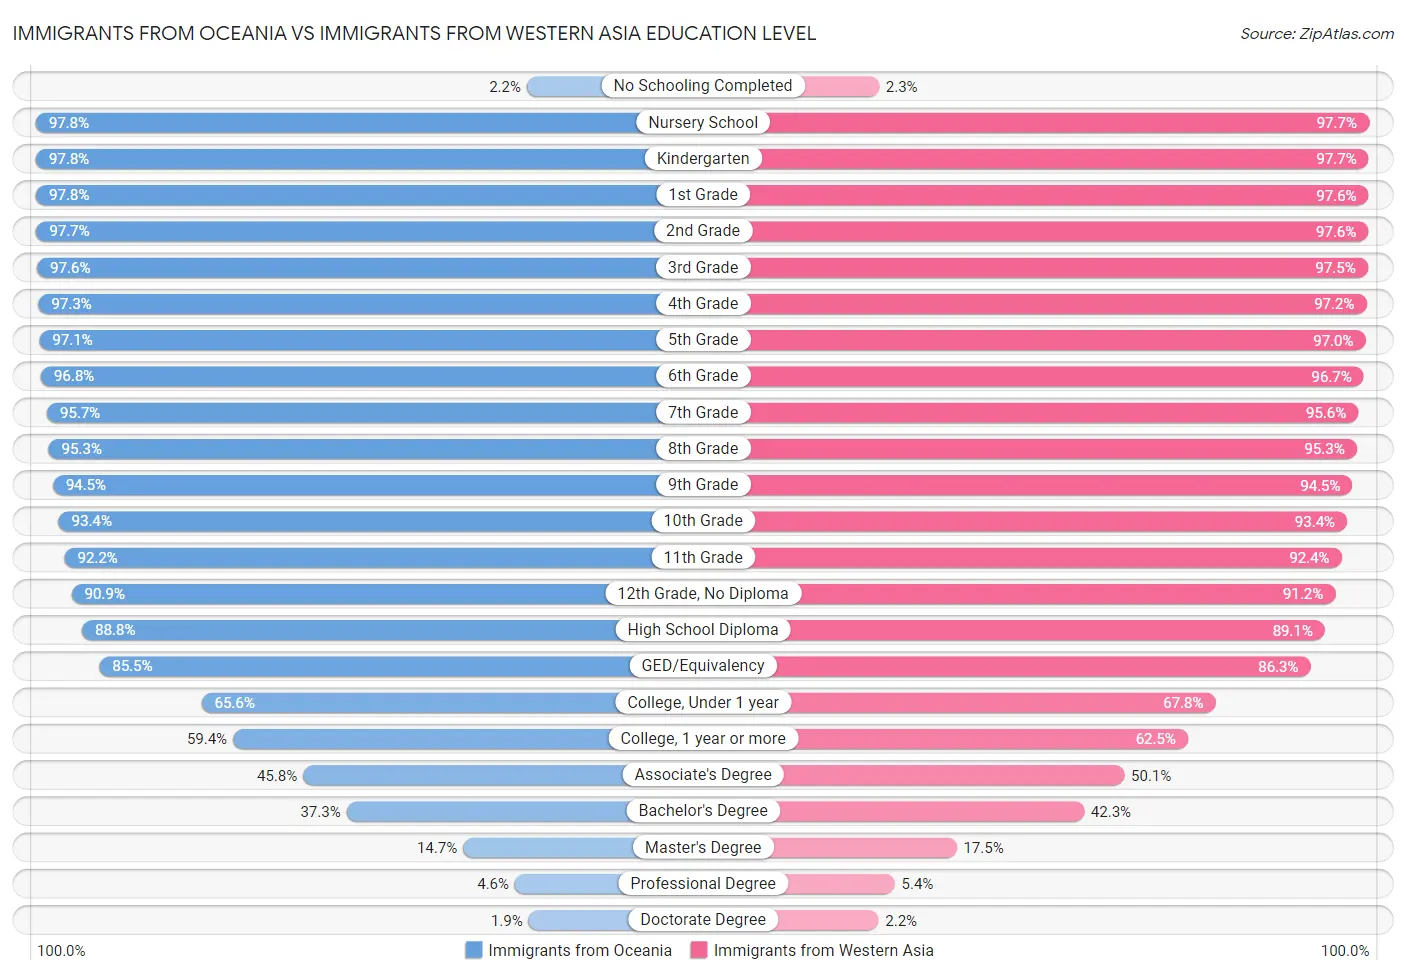 Immigrants from Oceania vs Immigrants from Western Asia Education Level